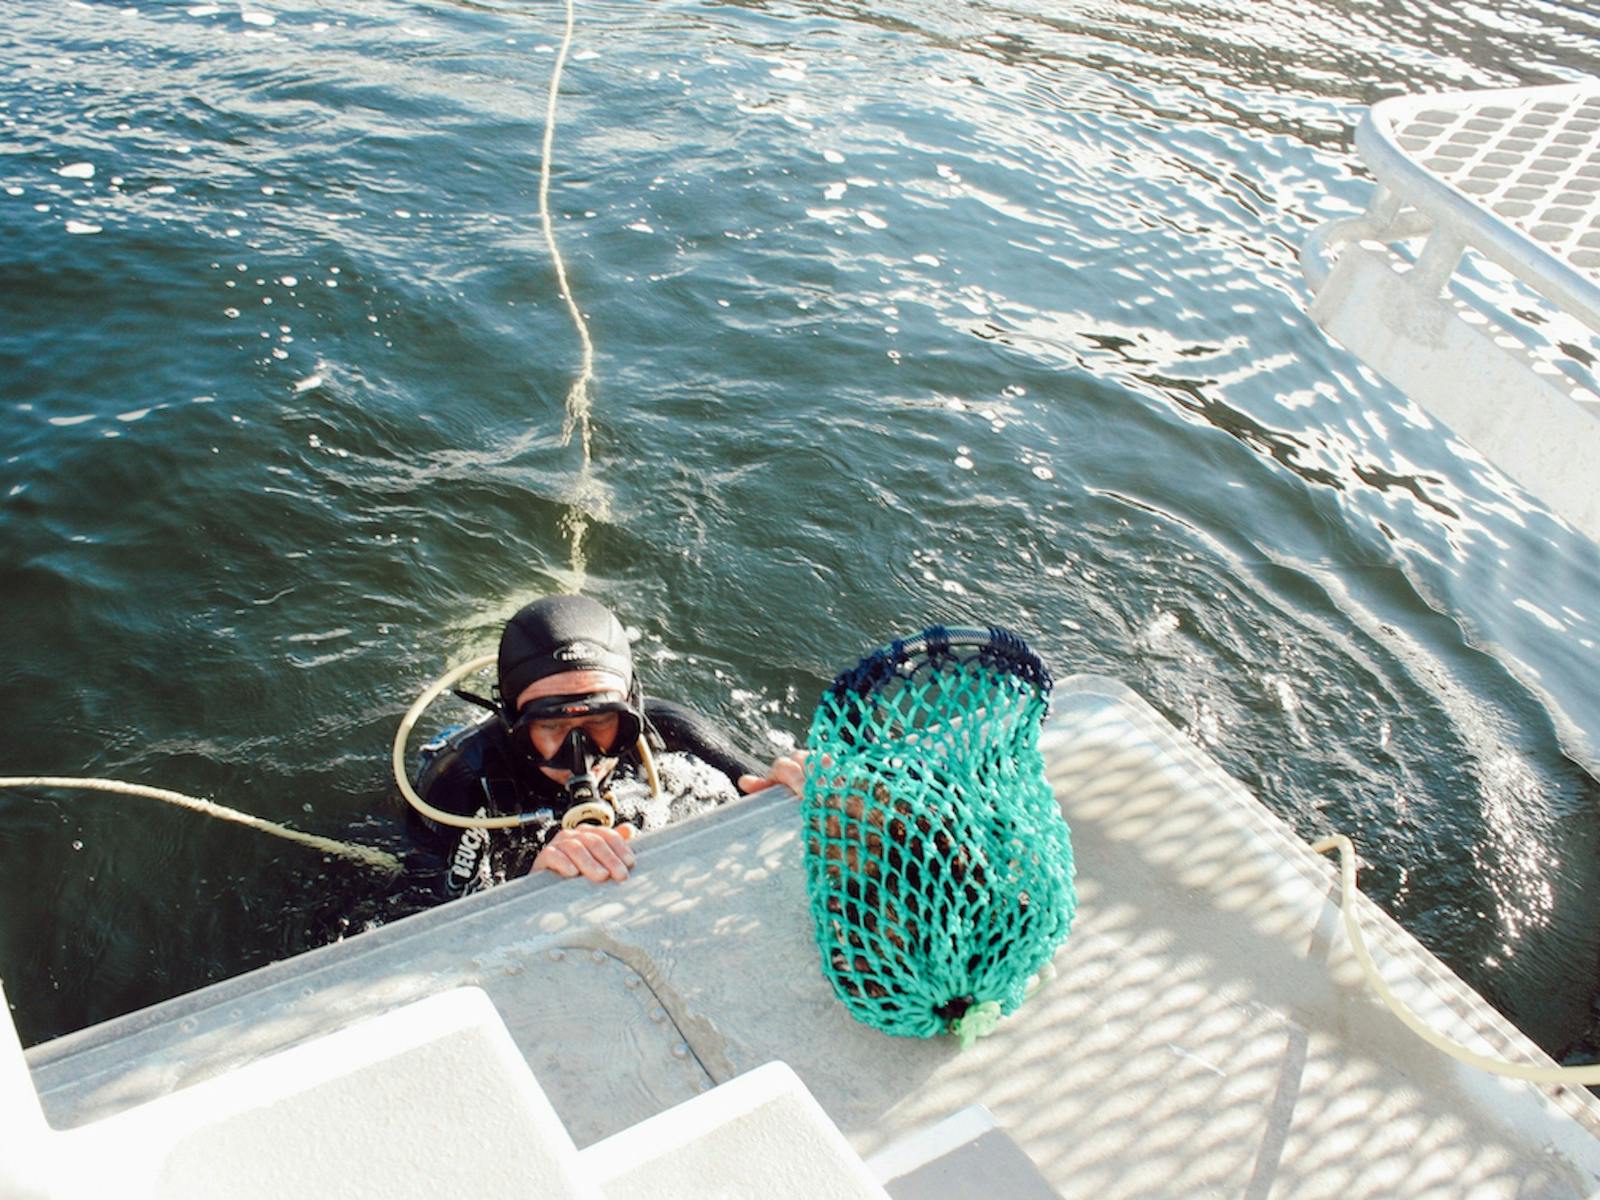 Our skilled divers harvest local Tasmanian Urchin and Periwinkles to sample onboard